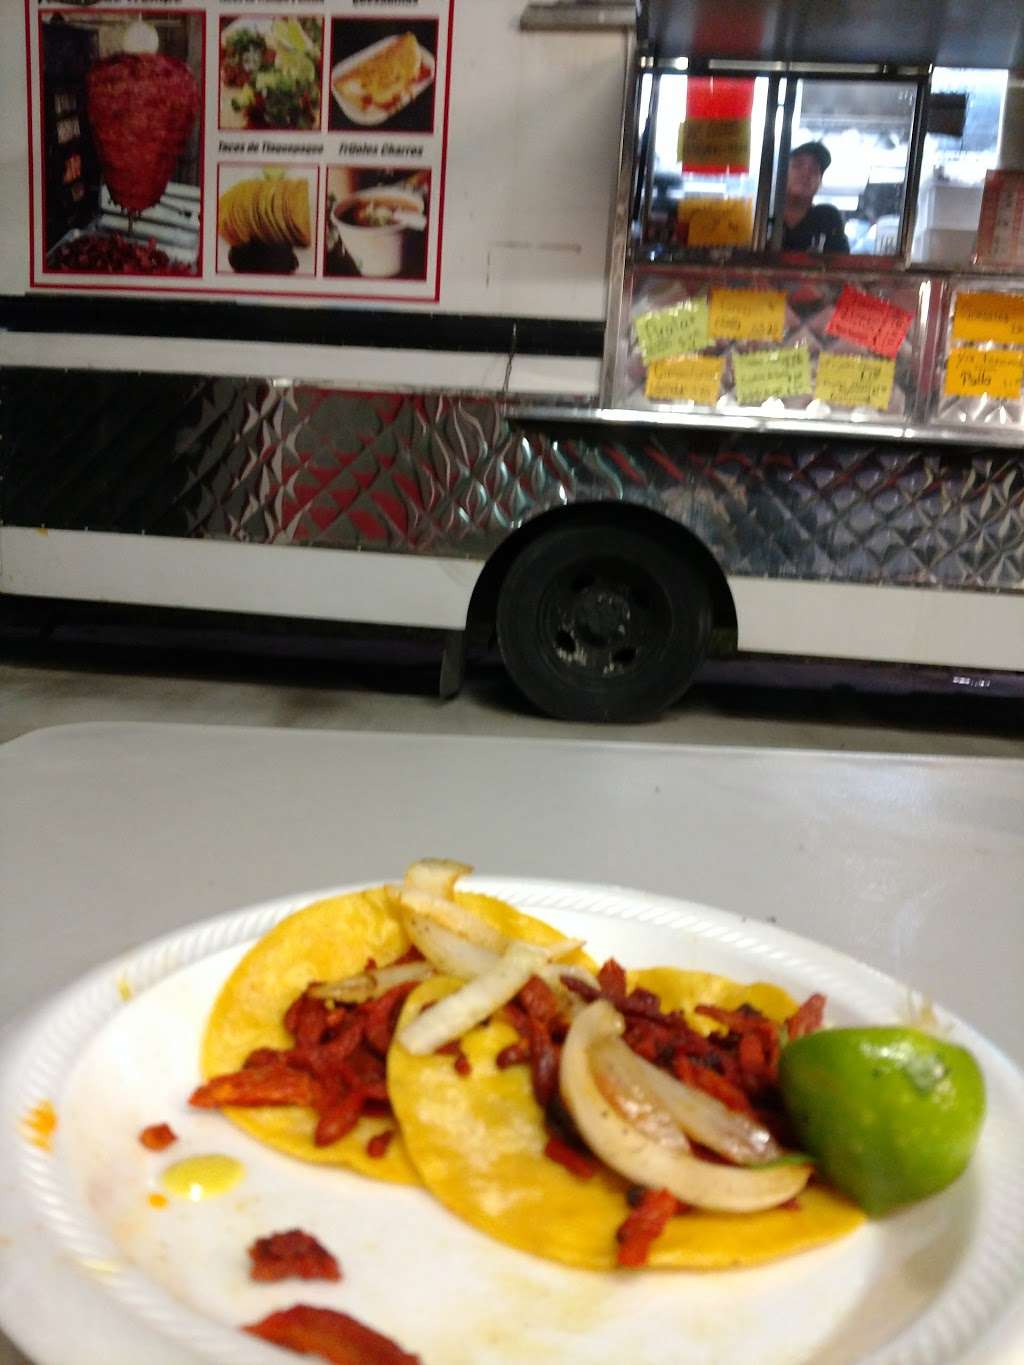 Tacos El Toro #1 | 14939 Woodforest Blvd, Channelview, TX 77530, USA | Phone: (832) 890-9314